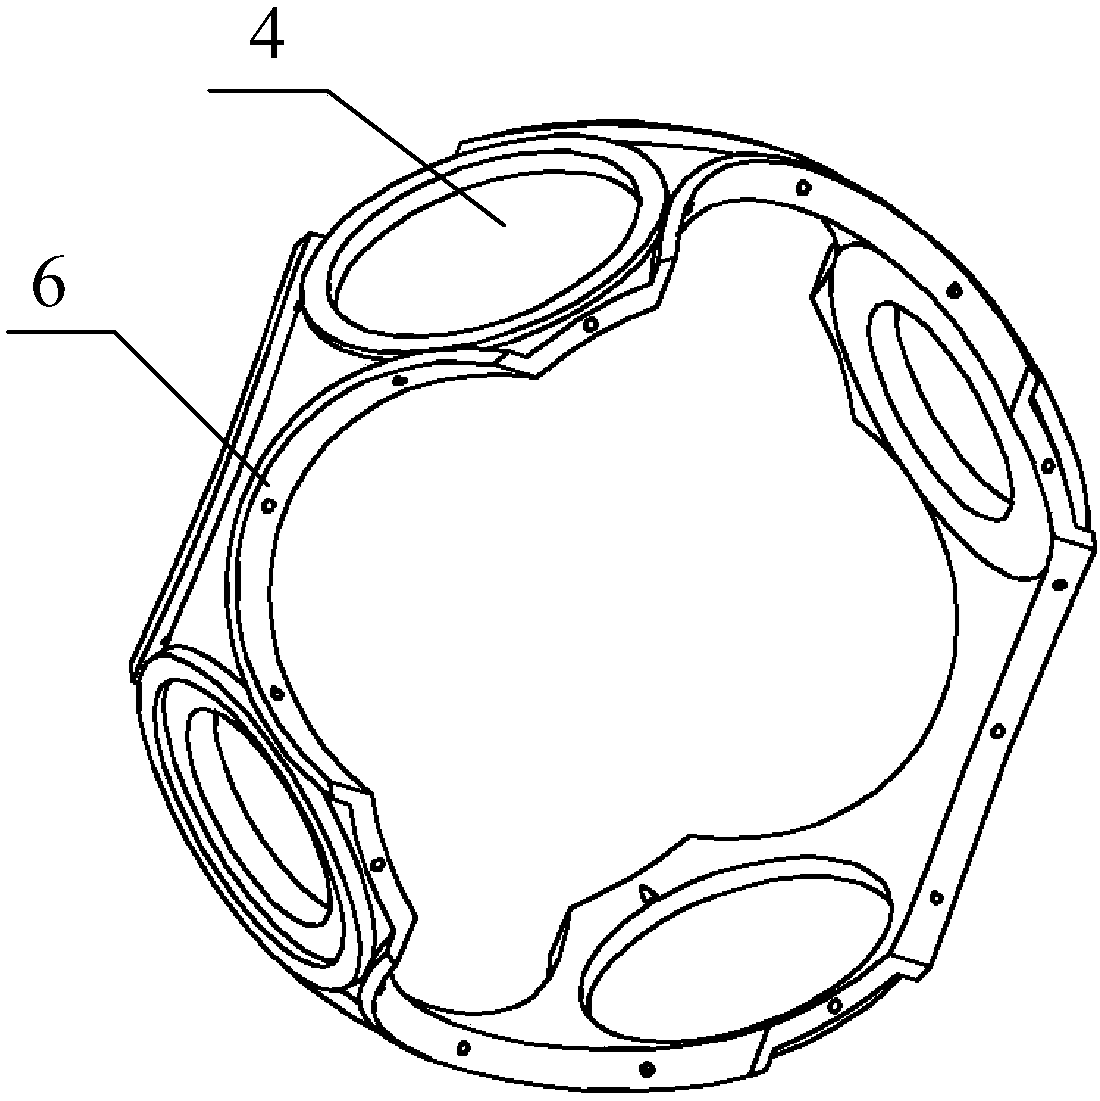 Combined type spherical frame for inertial stabilization platform